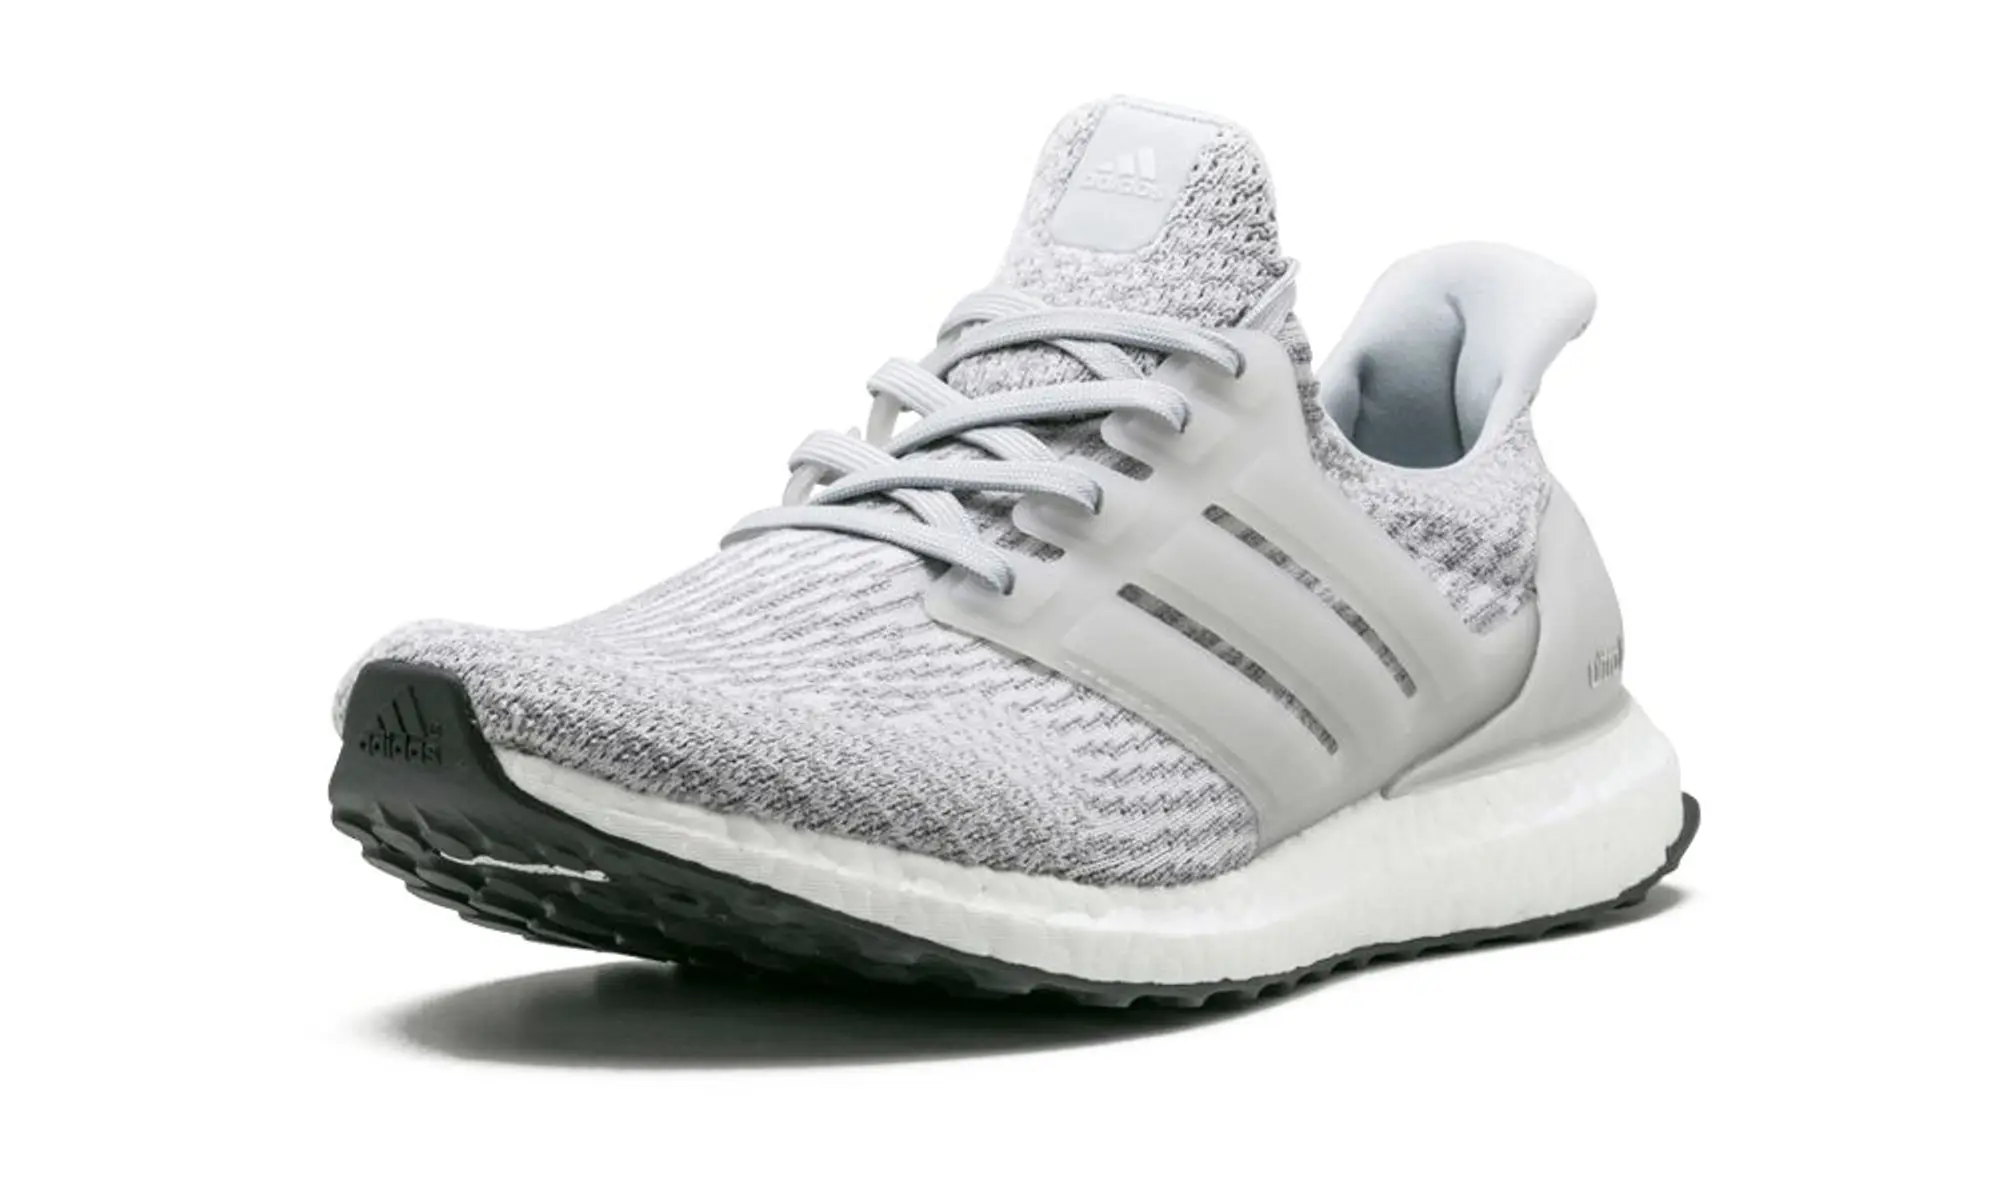 adidas UltraBoost Boost 3.0 Shoes